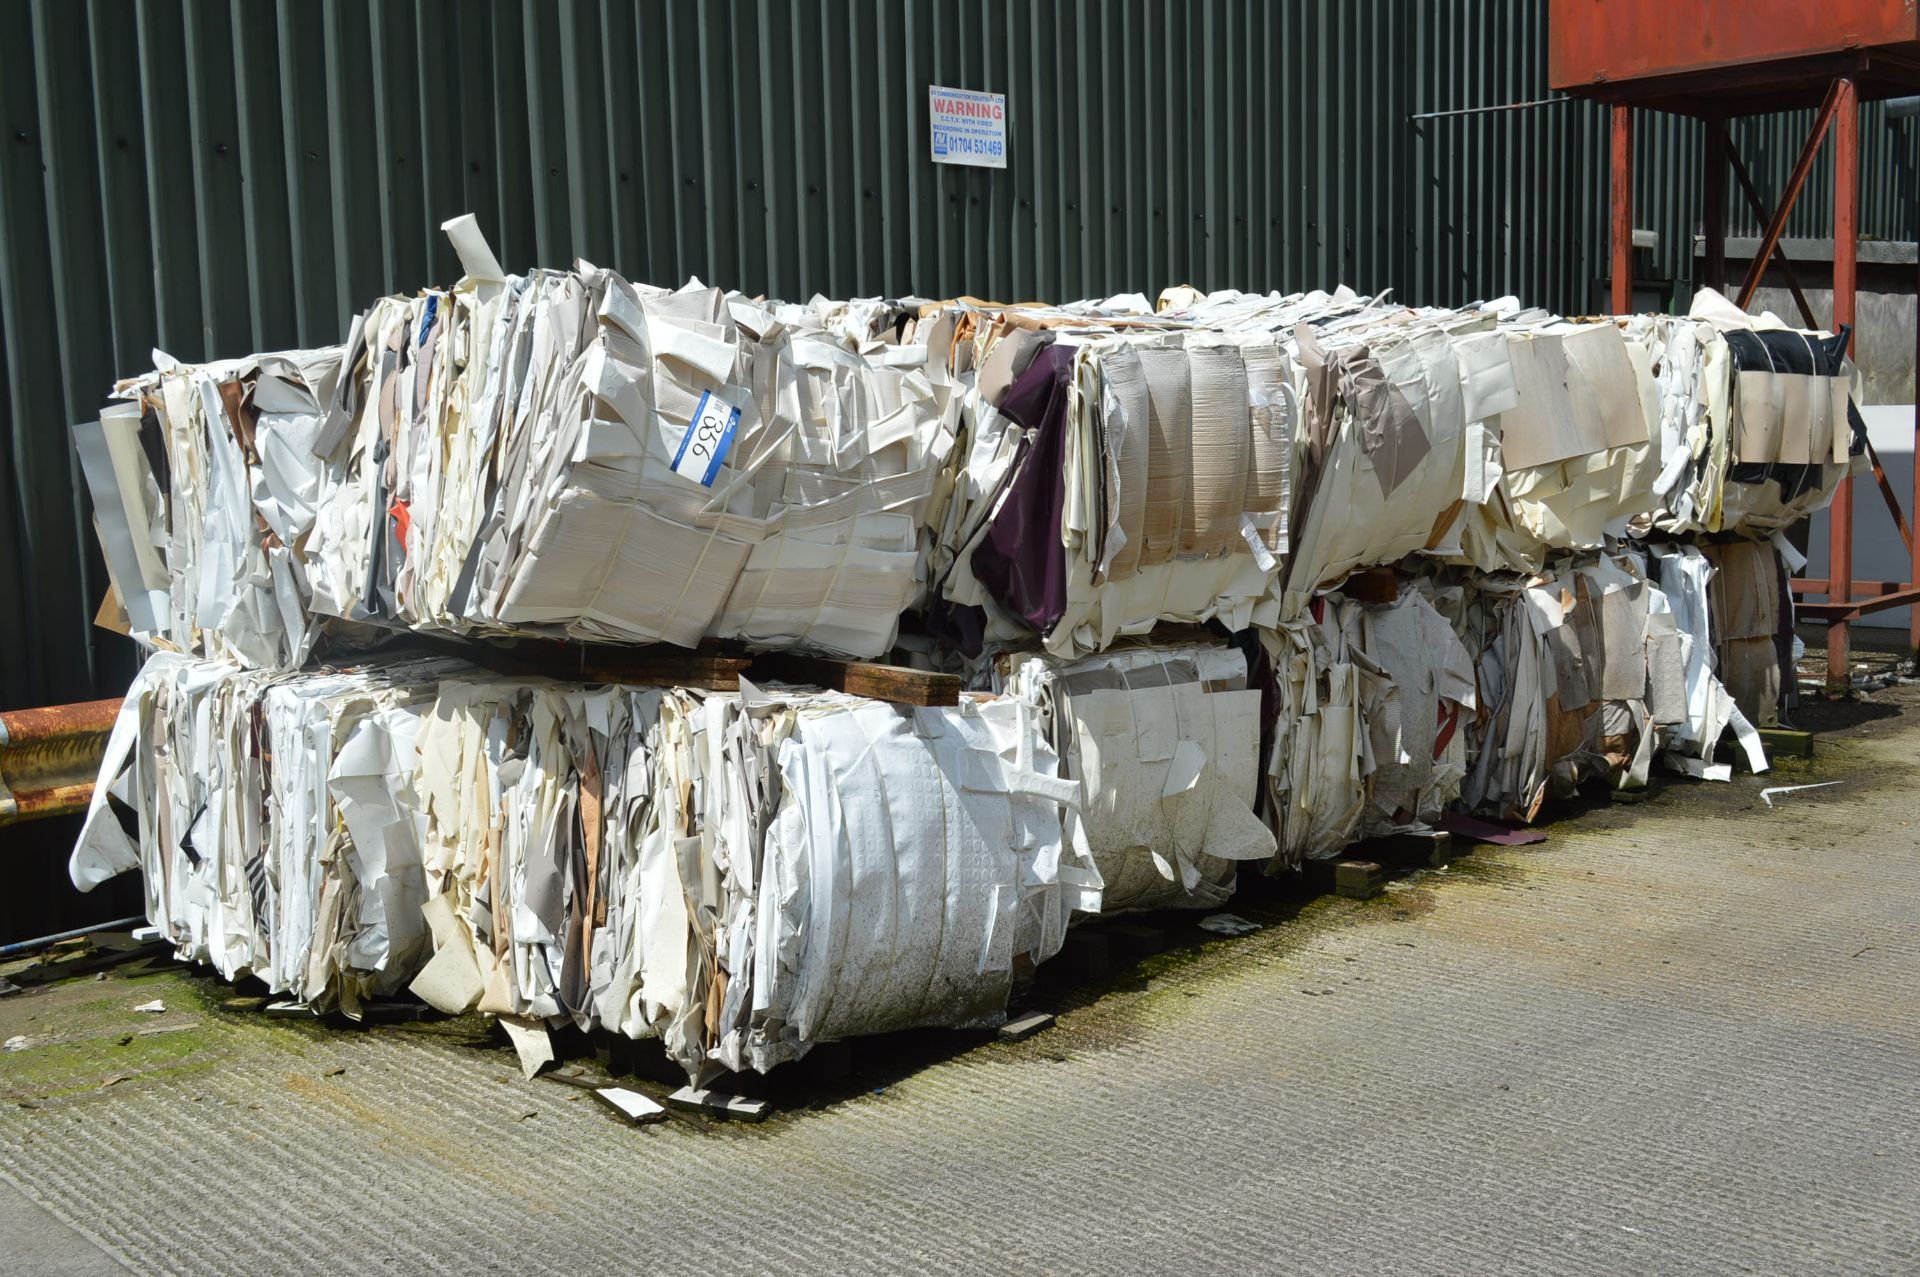 Baled Vinyl, as set out in one area (yard)